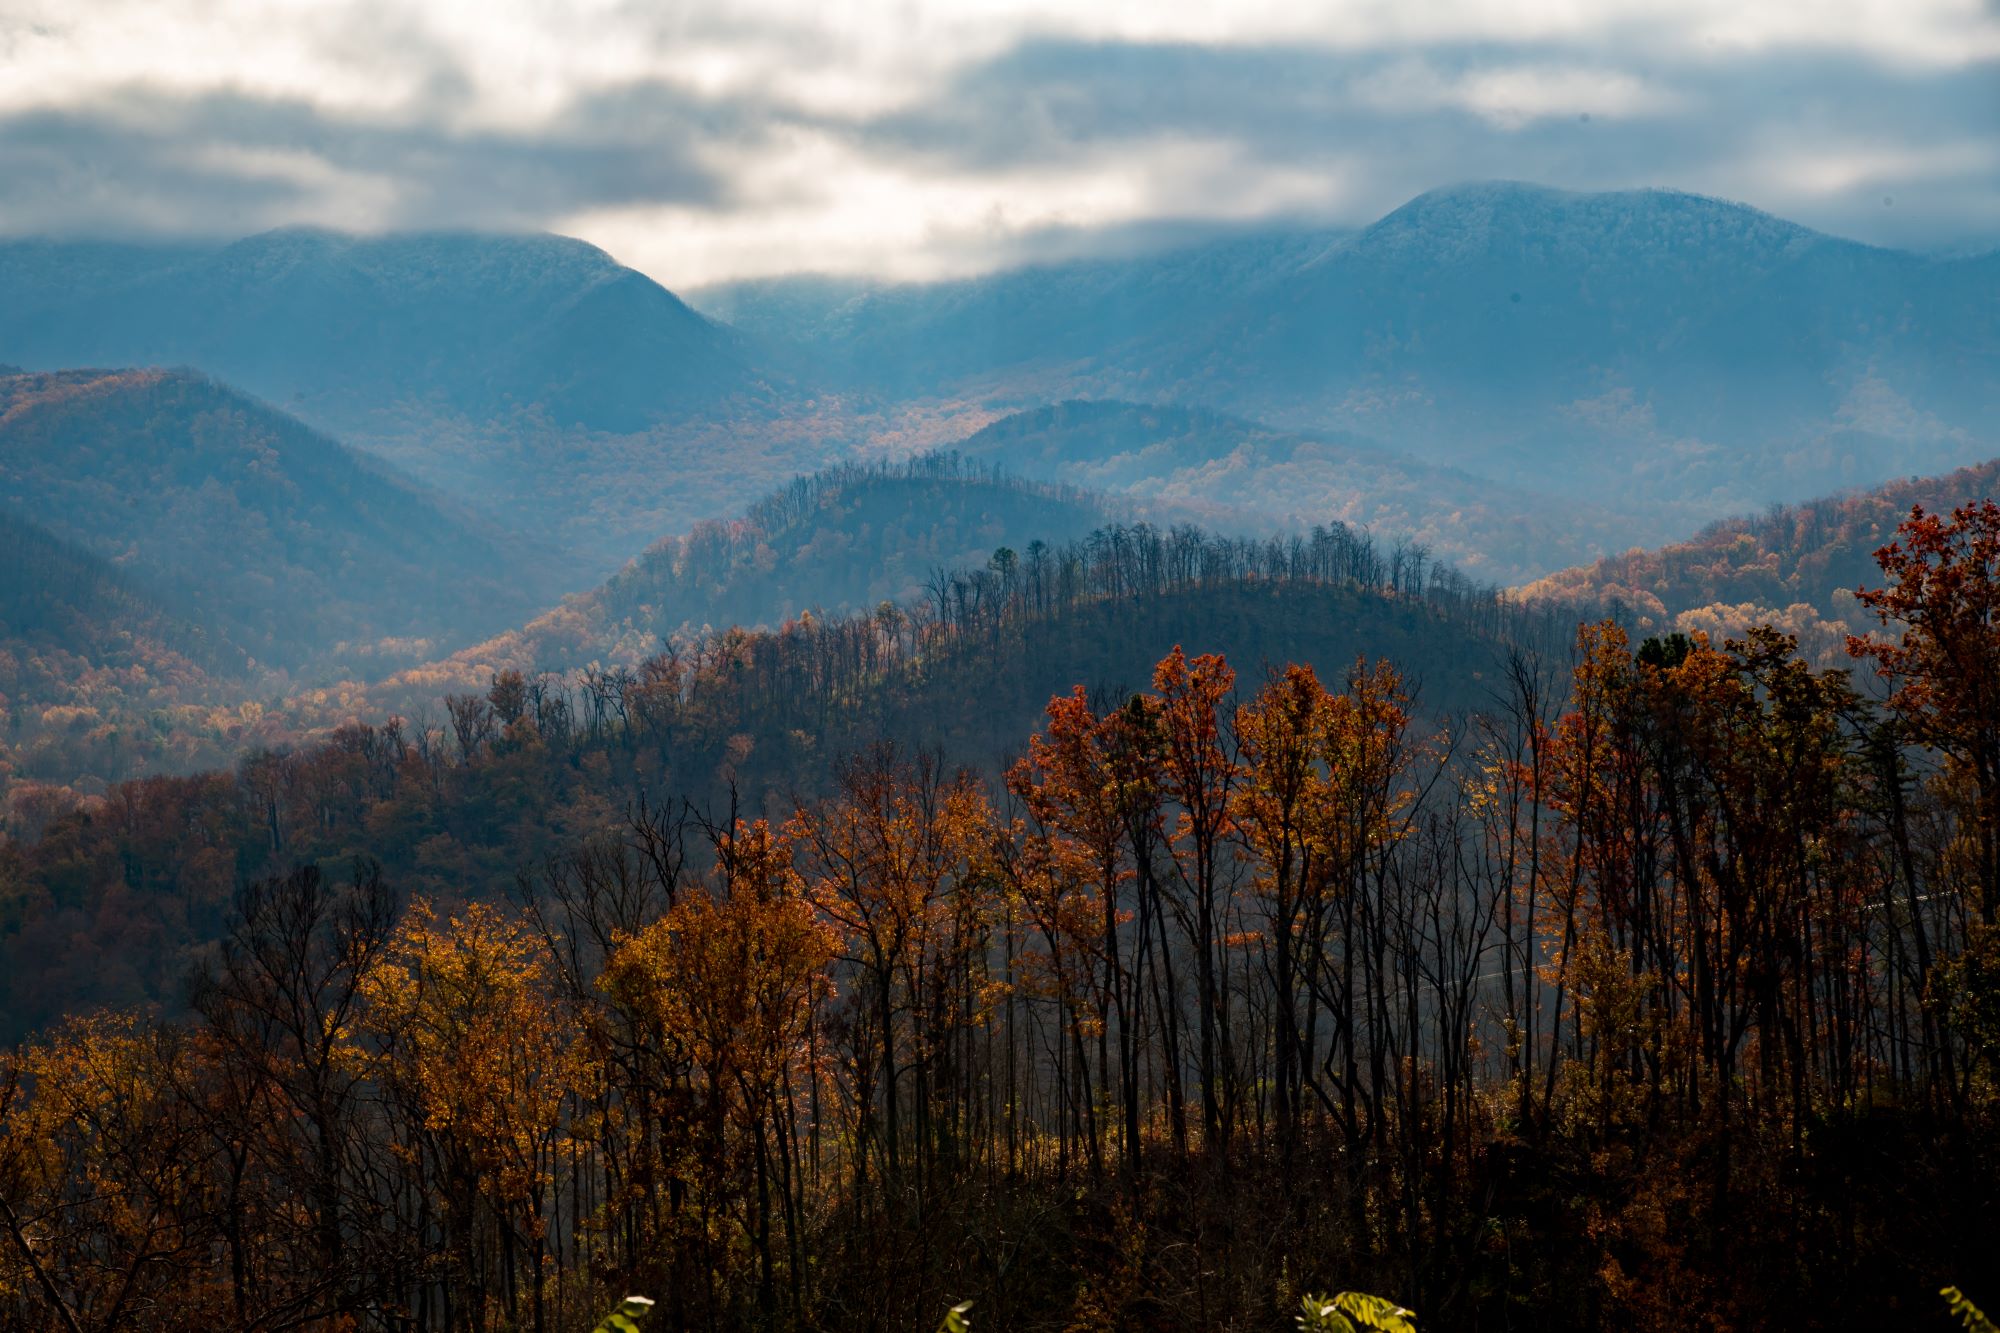 A beautiful scene of the rolling hills of the Smoky Mountains in the fall on a cloudy day.